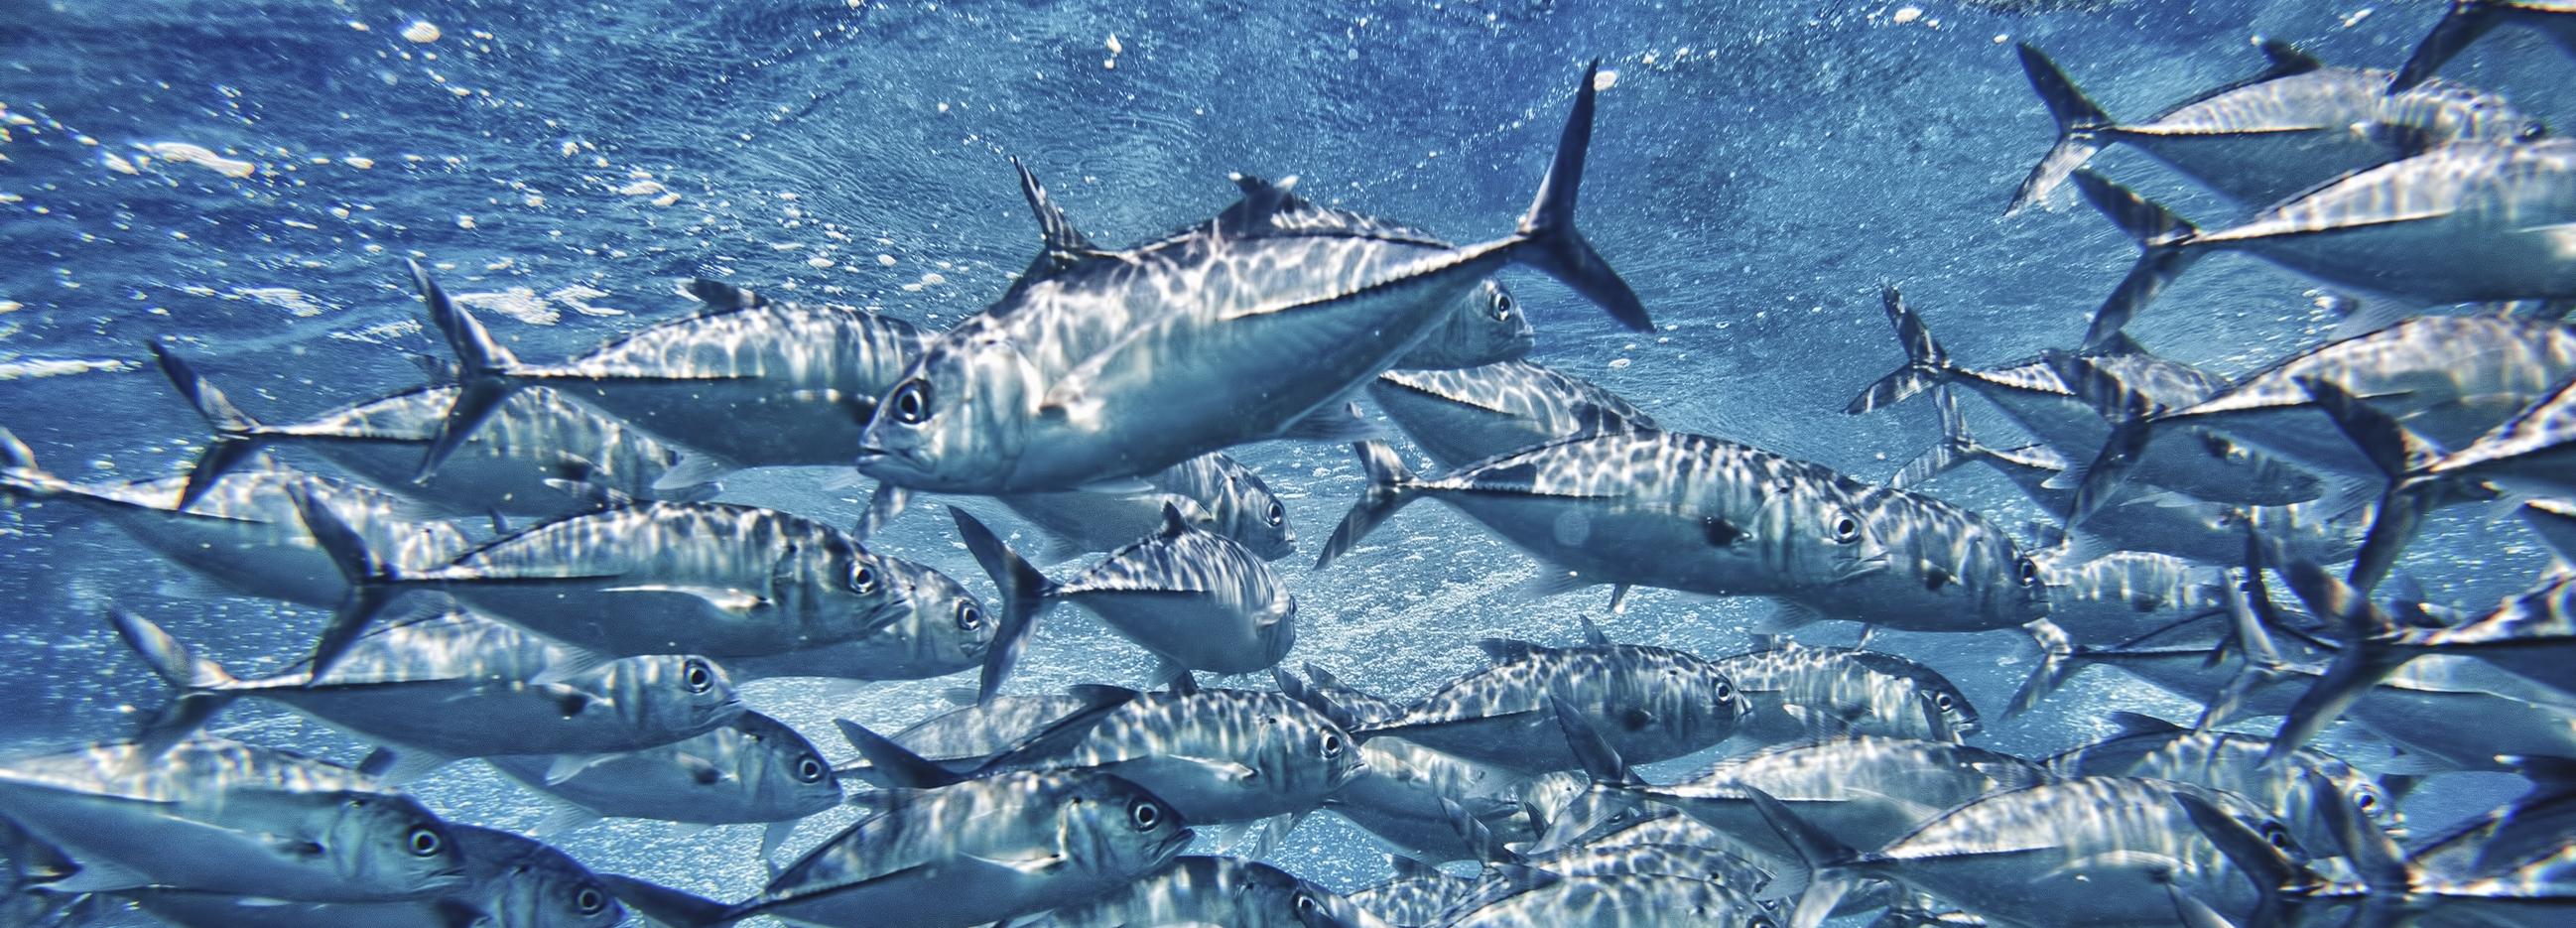 Trevally in water © Marine Stewardship Council 3